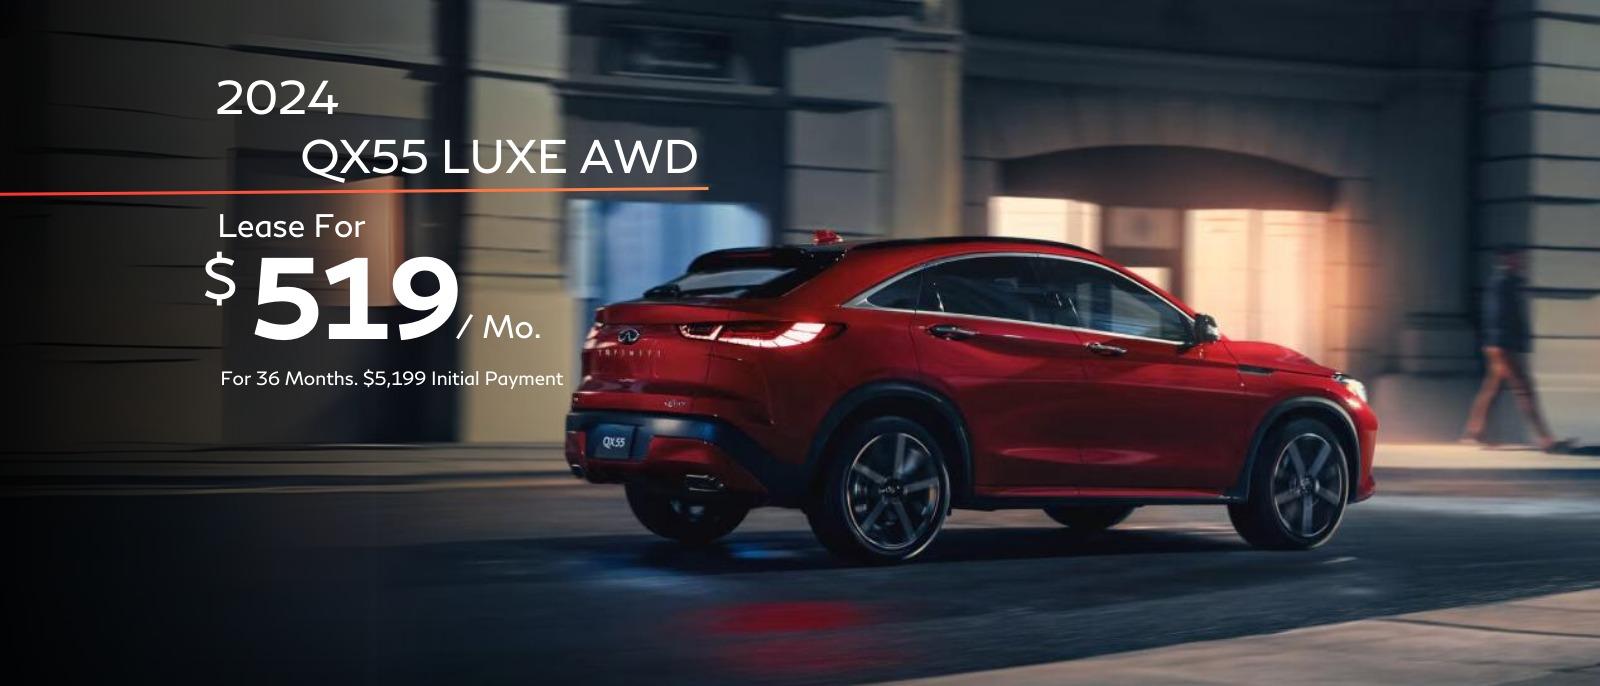 2024 QX55 Luxe AWD Lease 36 Months - $519/Month - $5,199 initial payment.